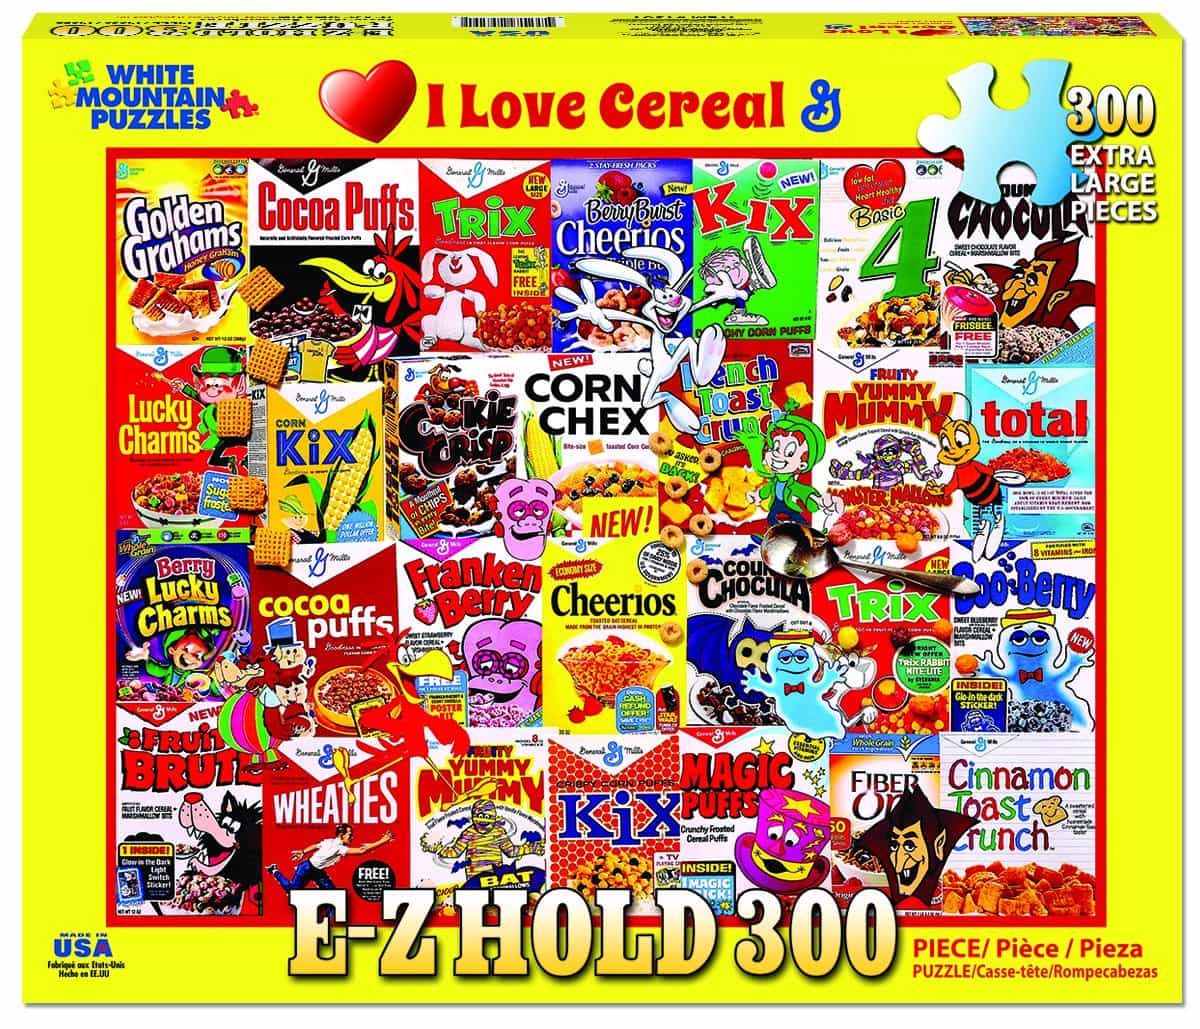 I Love Cereal Jigsaw Puzzle - 300 Piece